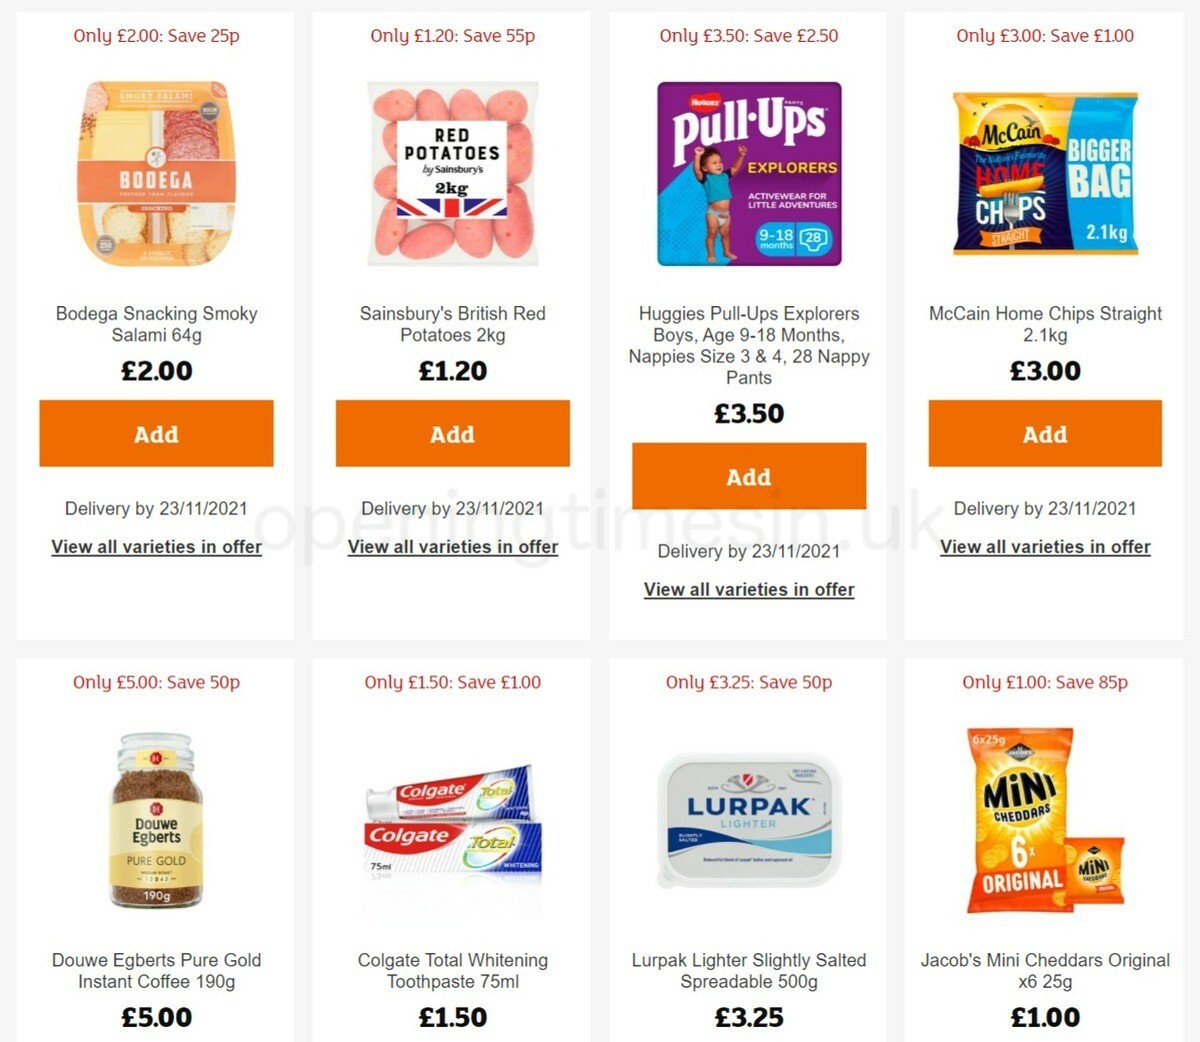 Sainsbury's Offers from 11 November